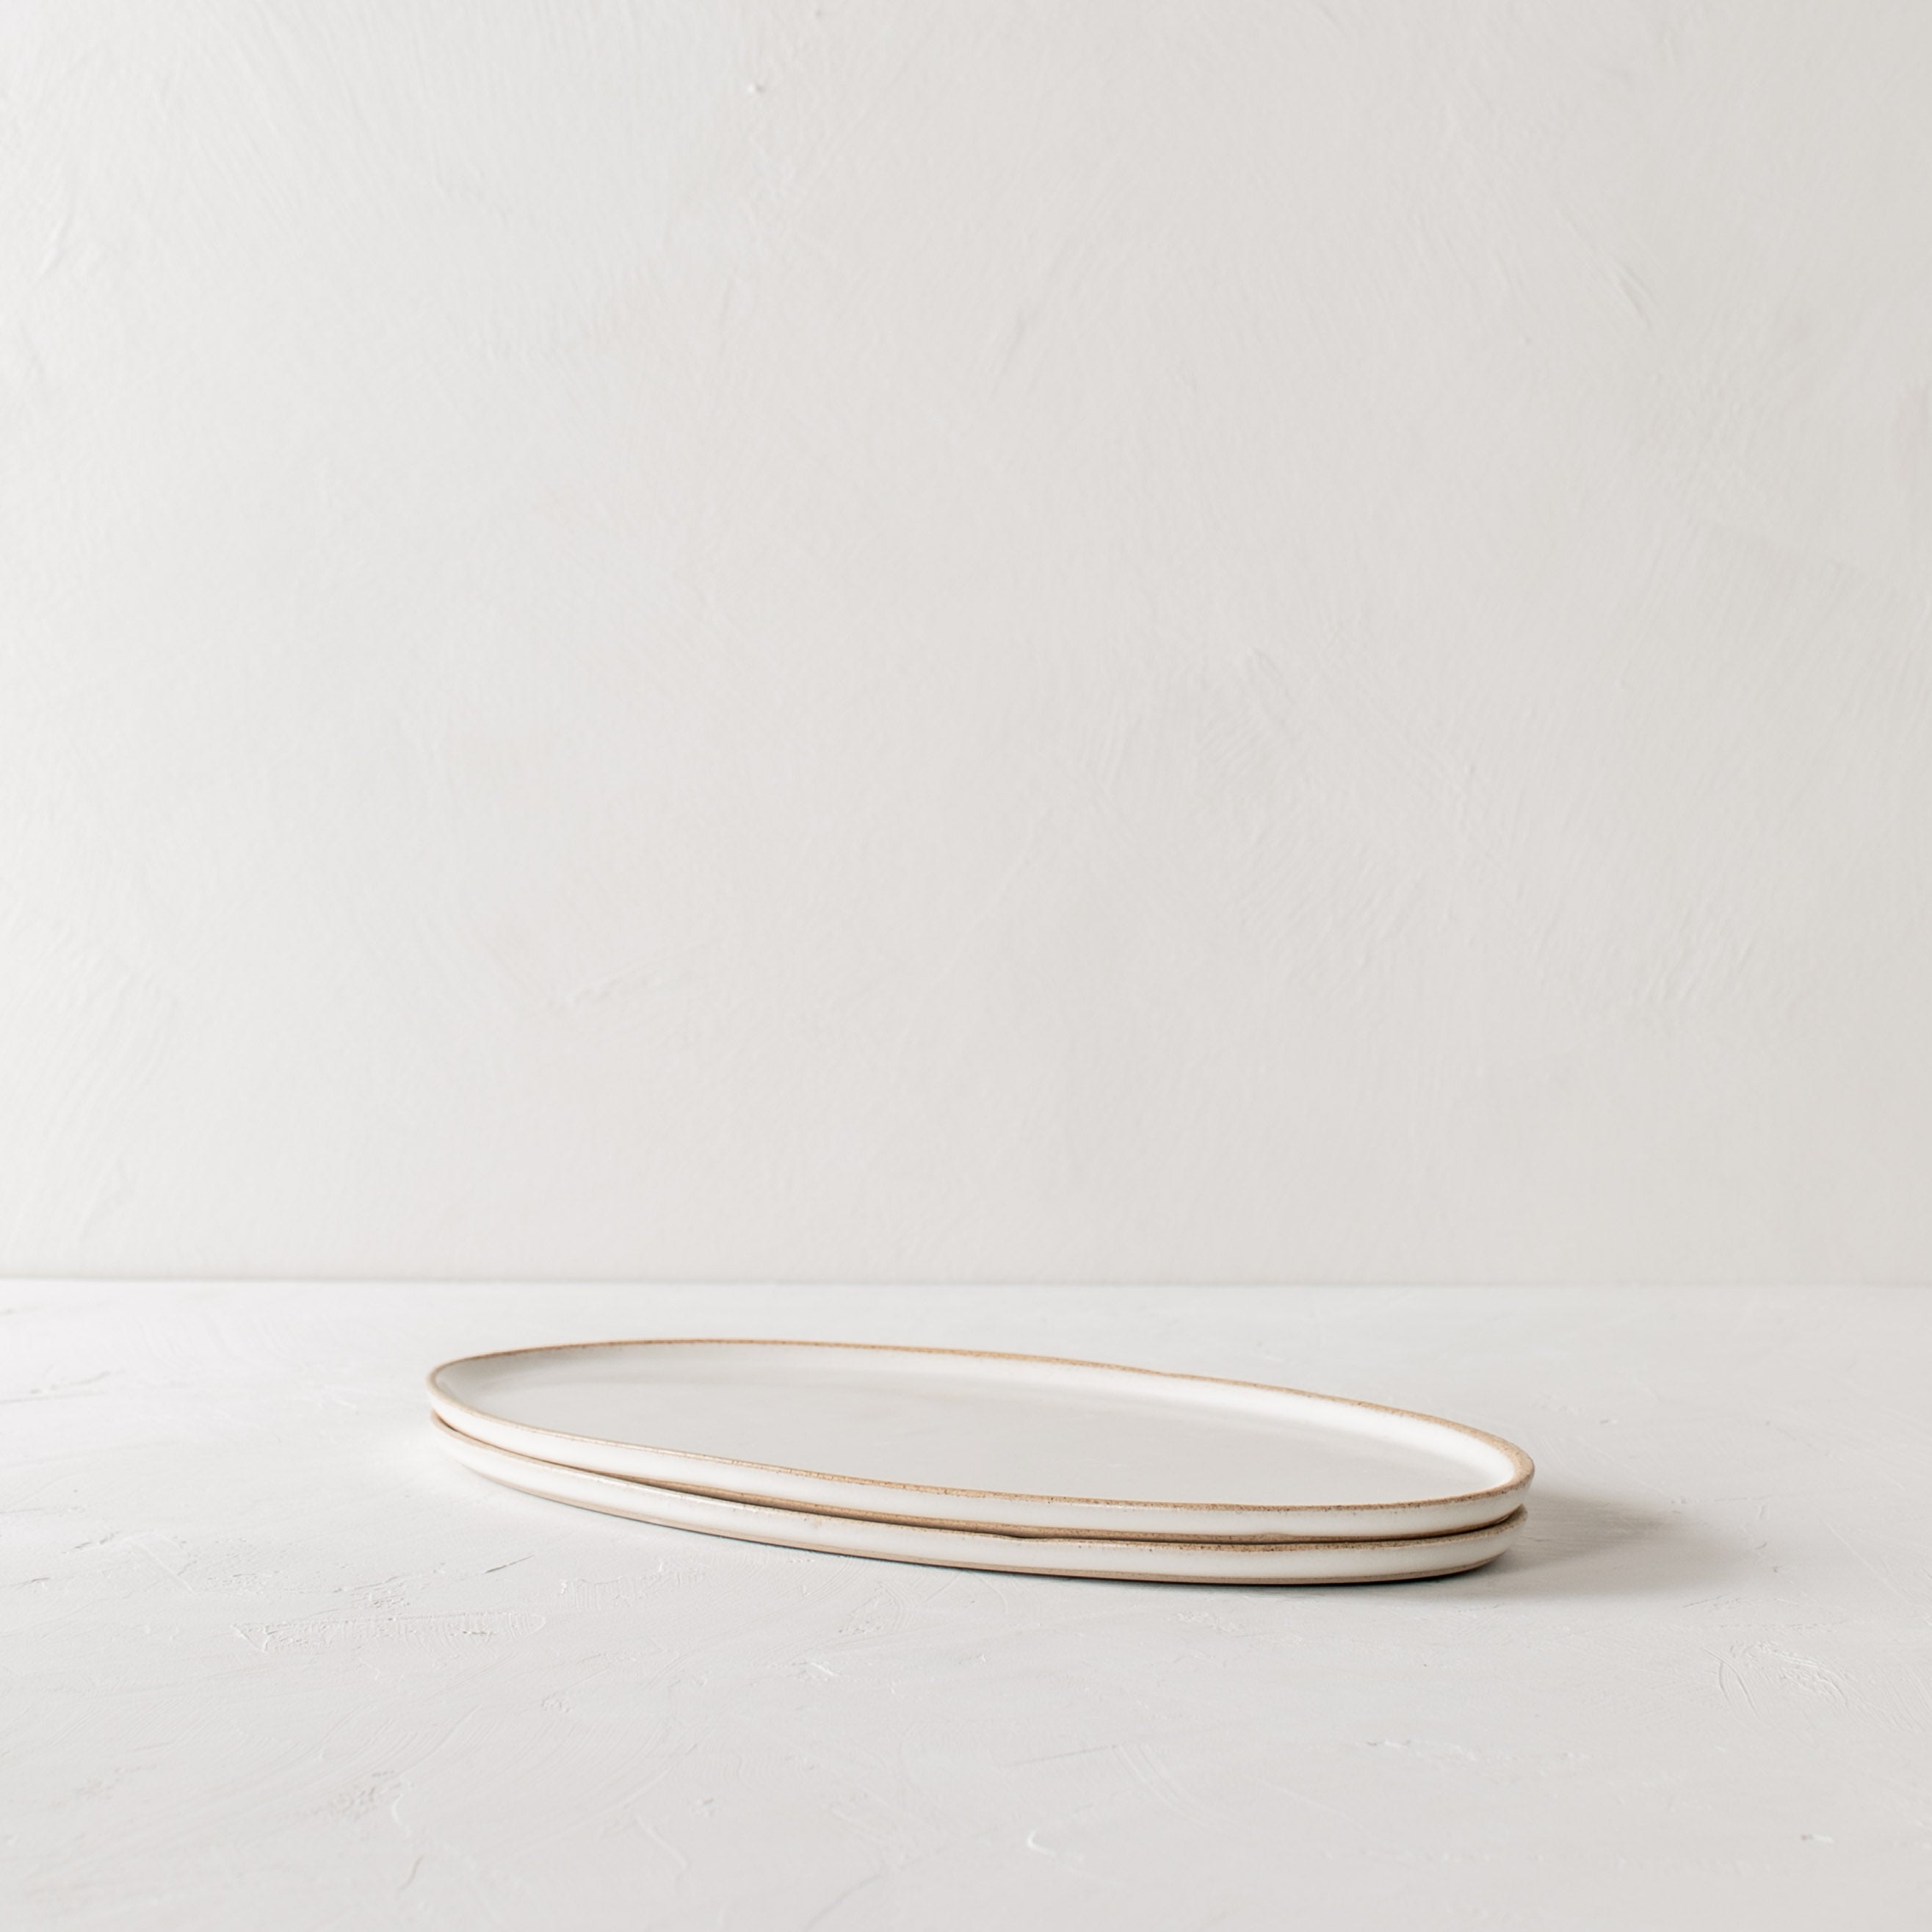 Two narrow vertical ceramic oval serving trays stacked on a white textured table-top. White ivory glazed with exposed stoneware rim. Handmade ceramic serving tray, designed and sold by Convivial Production, Kansas City ceramics.  